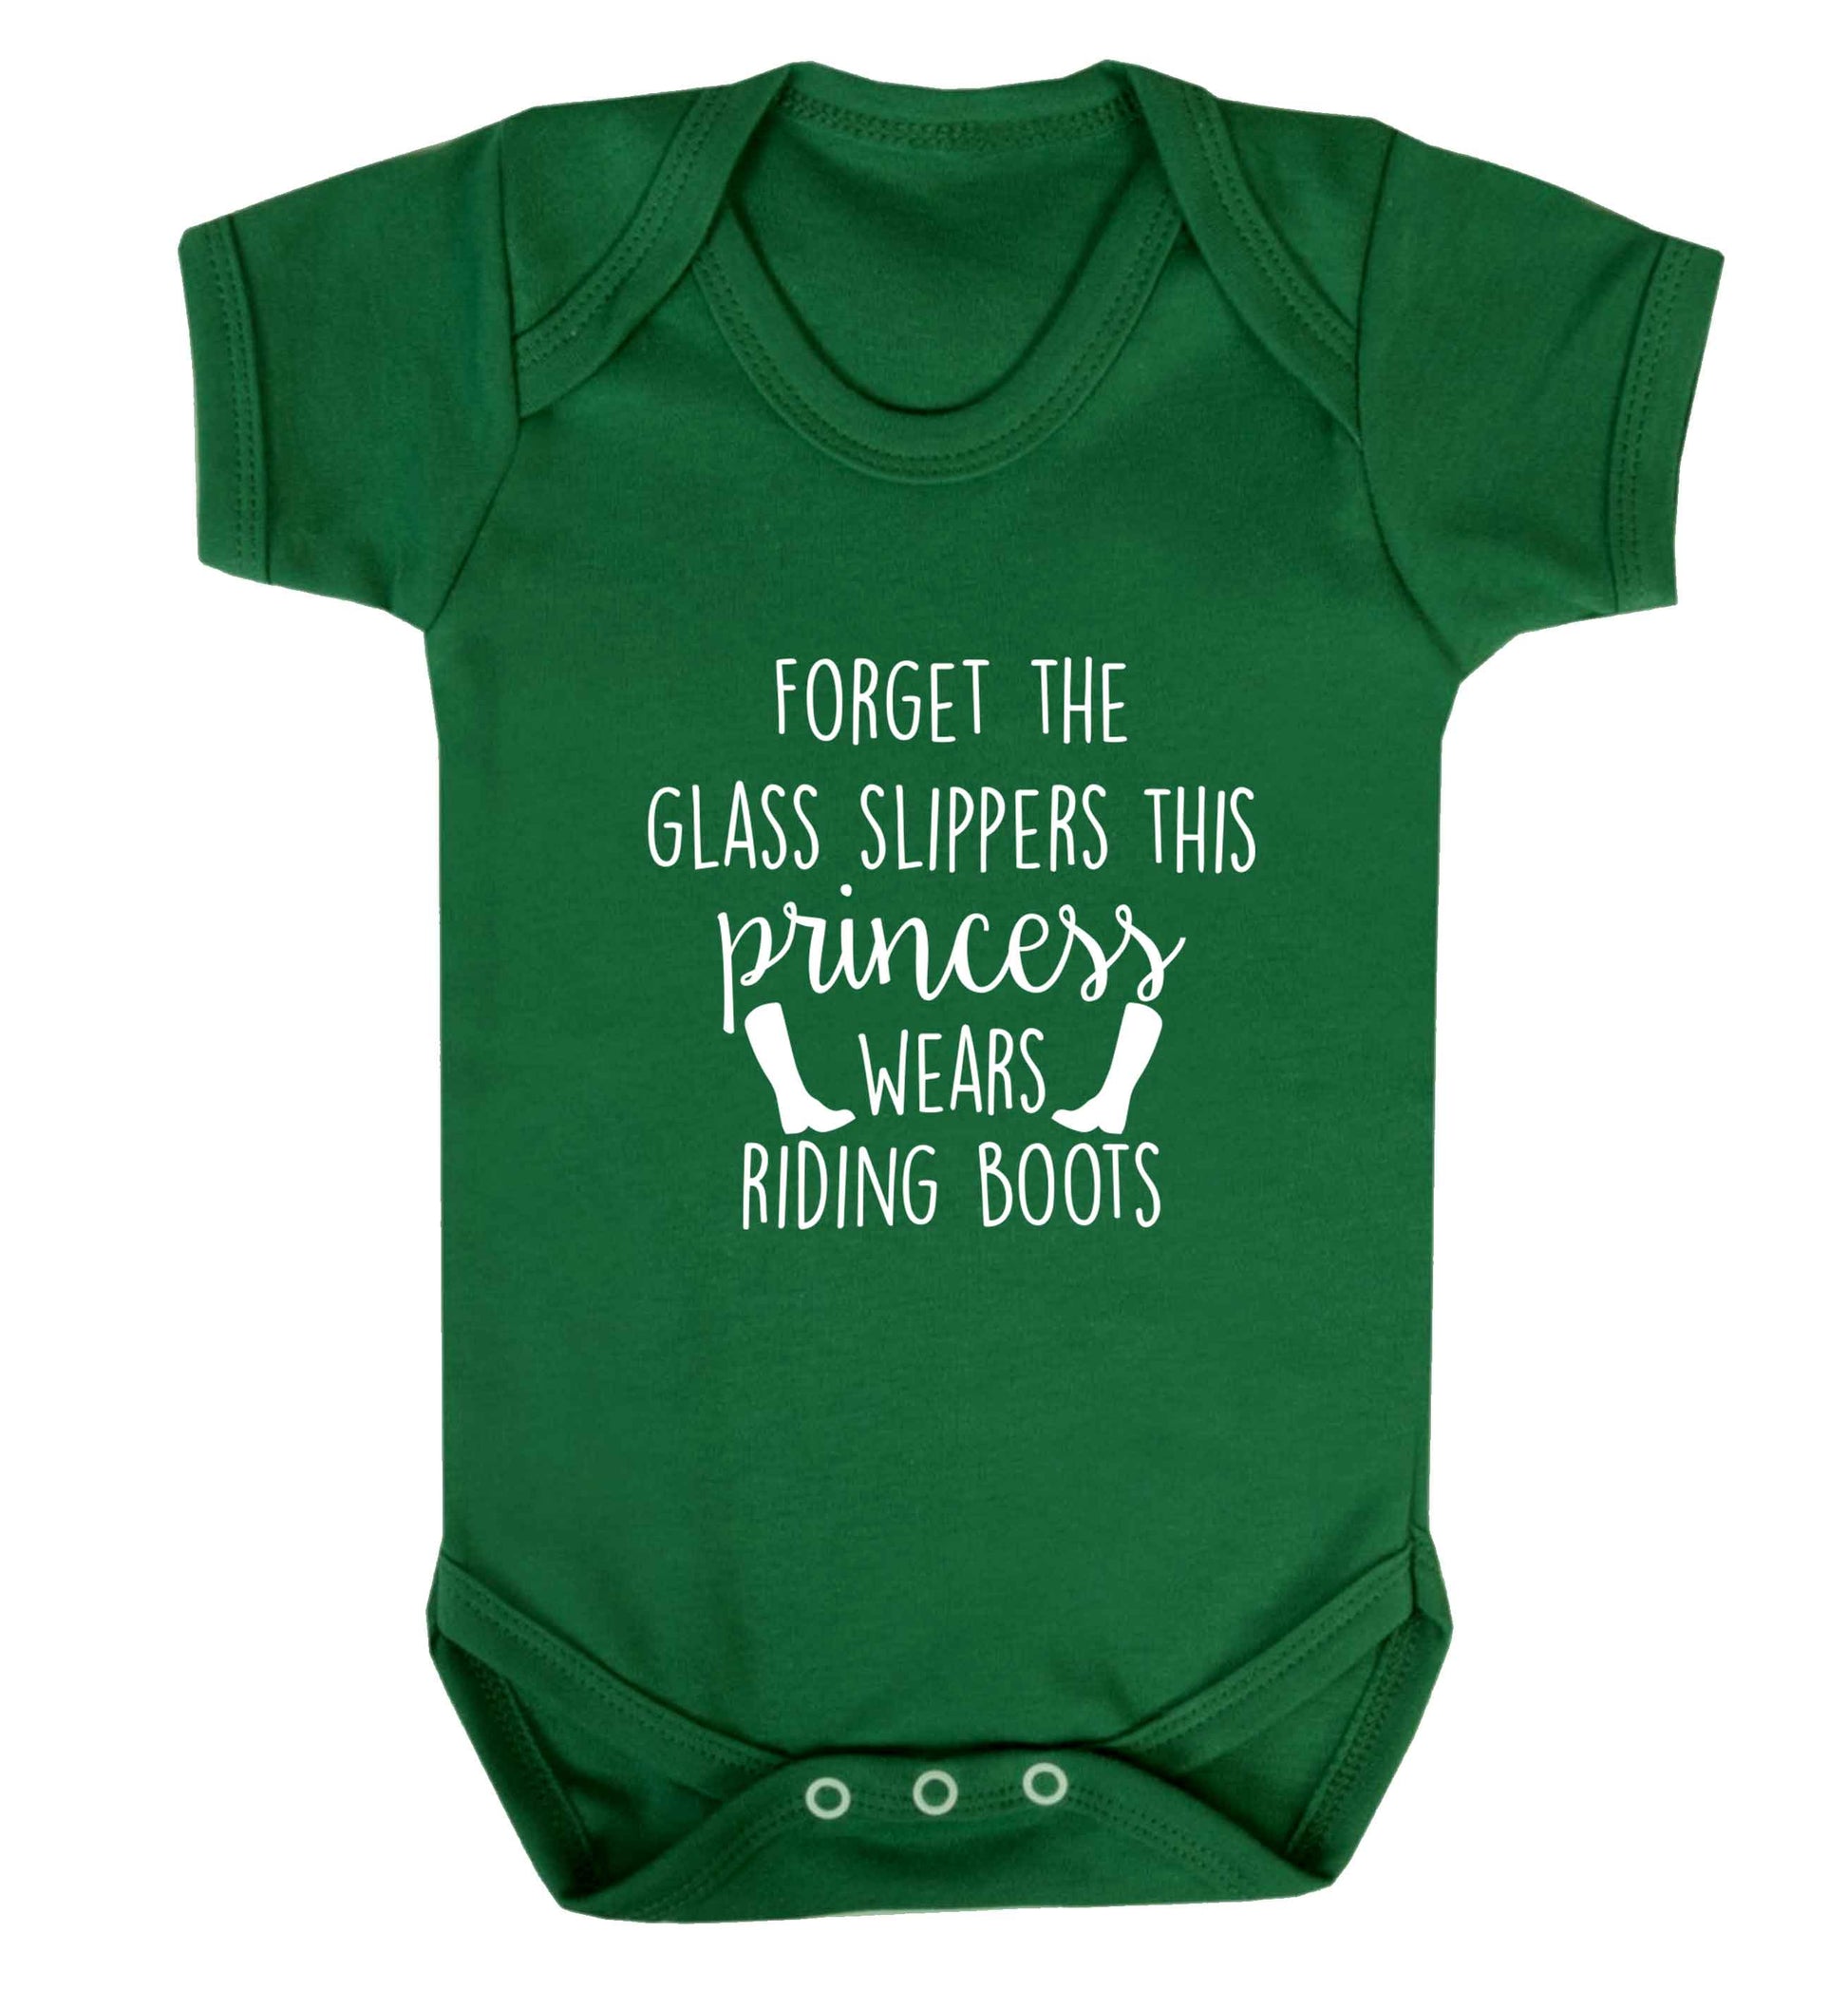 Forget the glass slippers this princess wears riding boots baby vest green 18-24 months